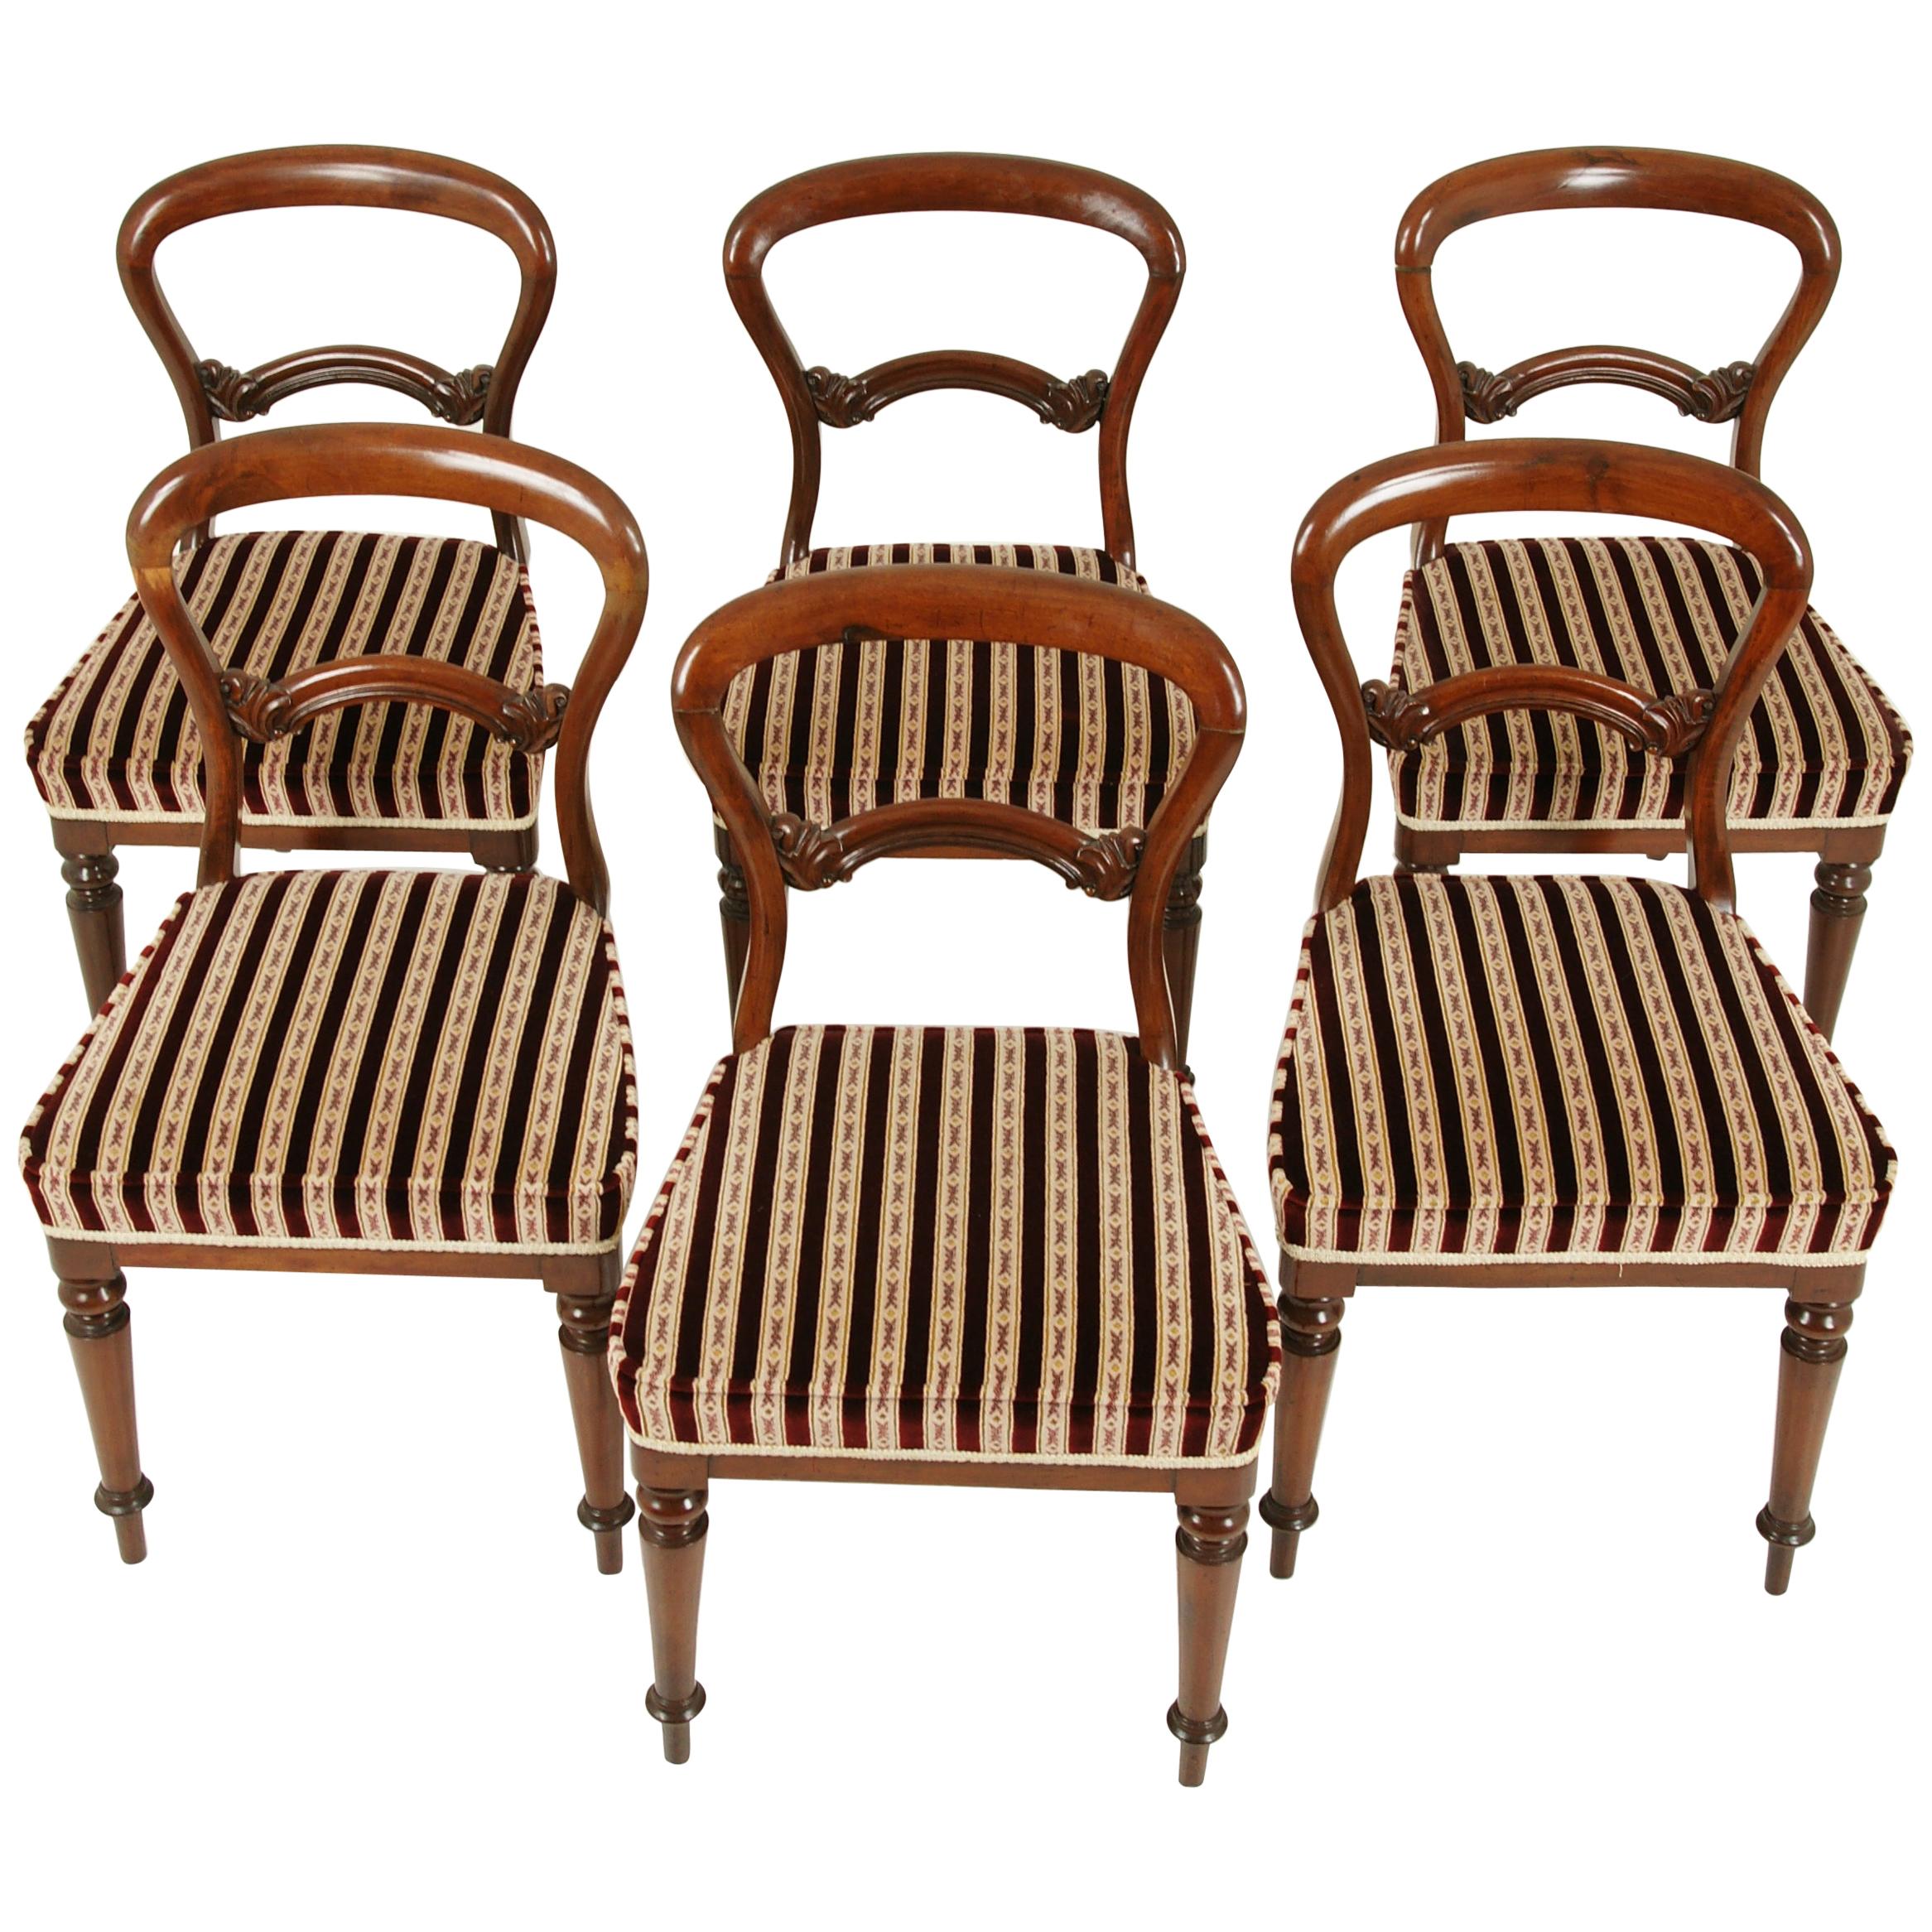 Antique Dining Chairs, 6 Balloon Back Chairs, Walnut, Victorian, 1880, B1573